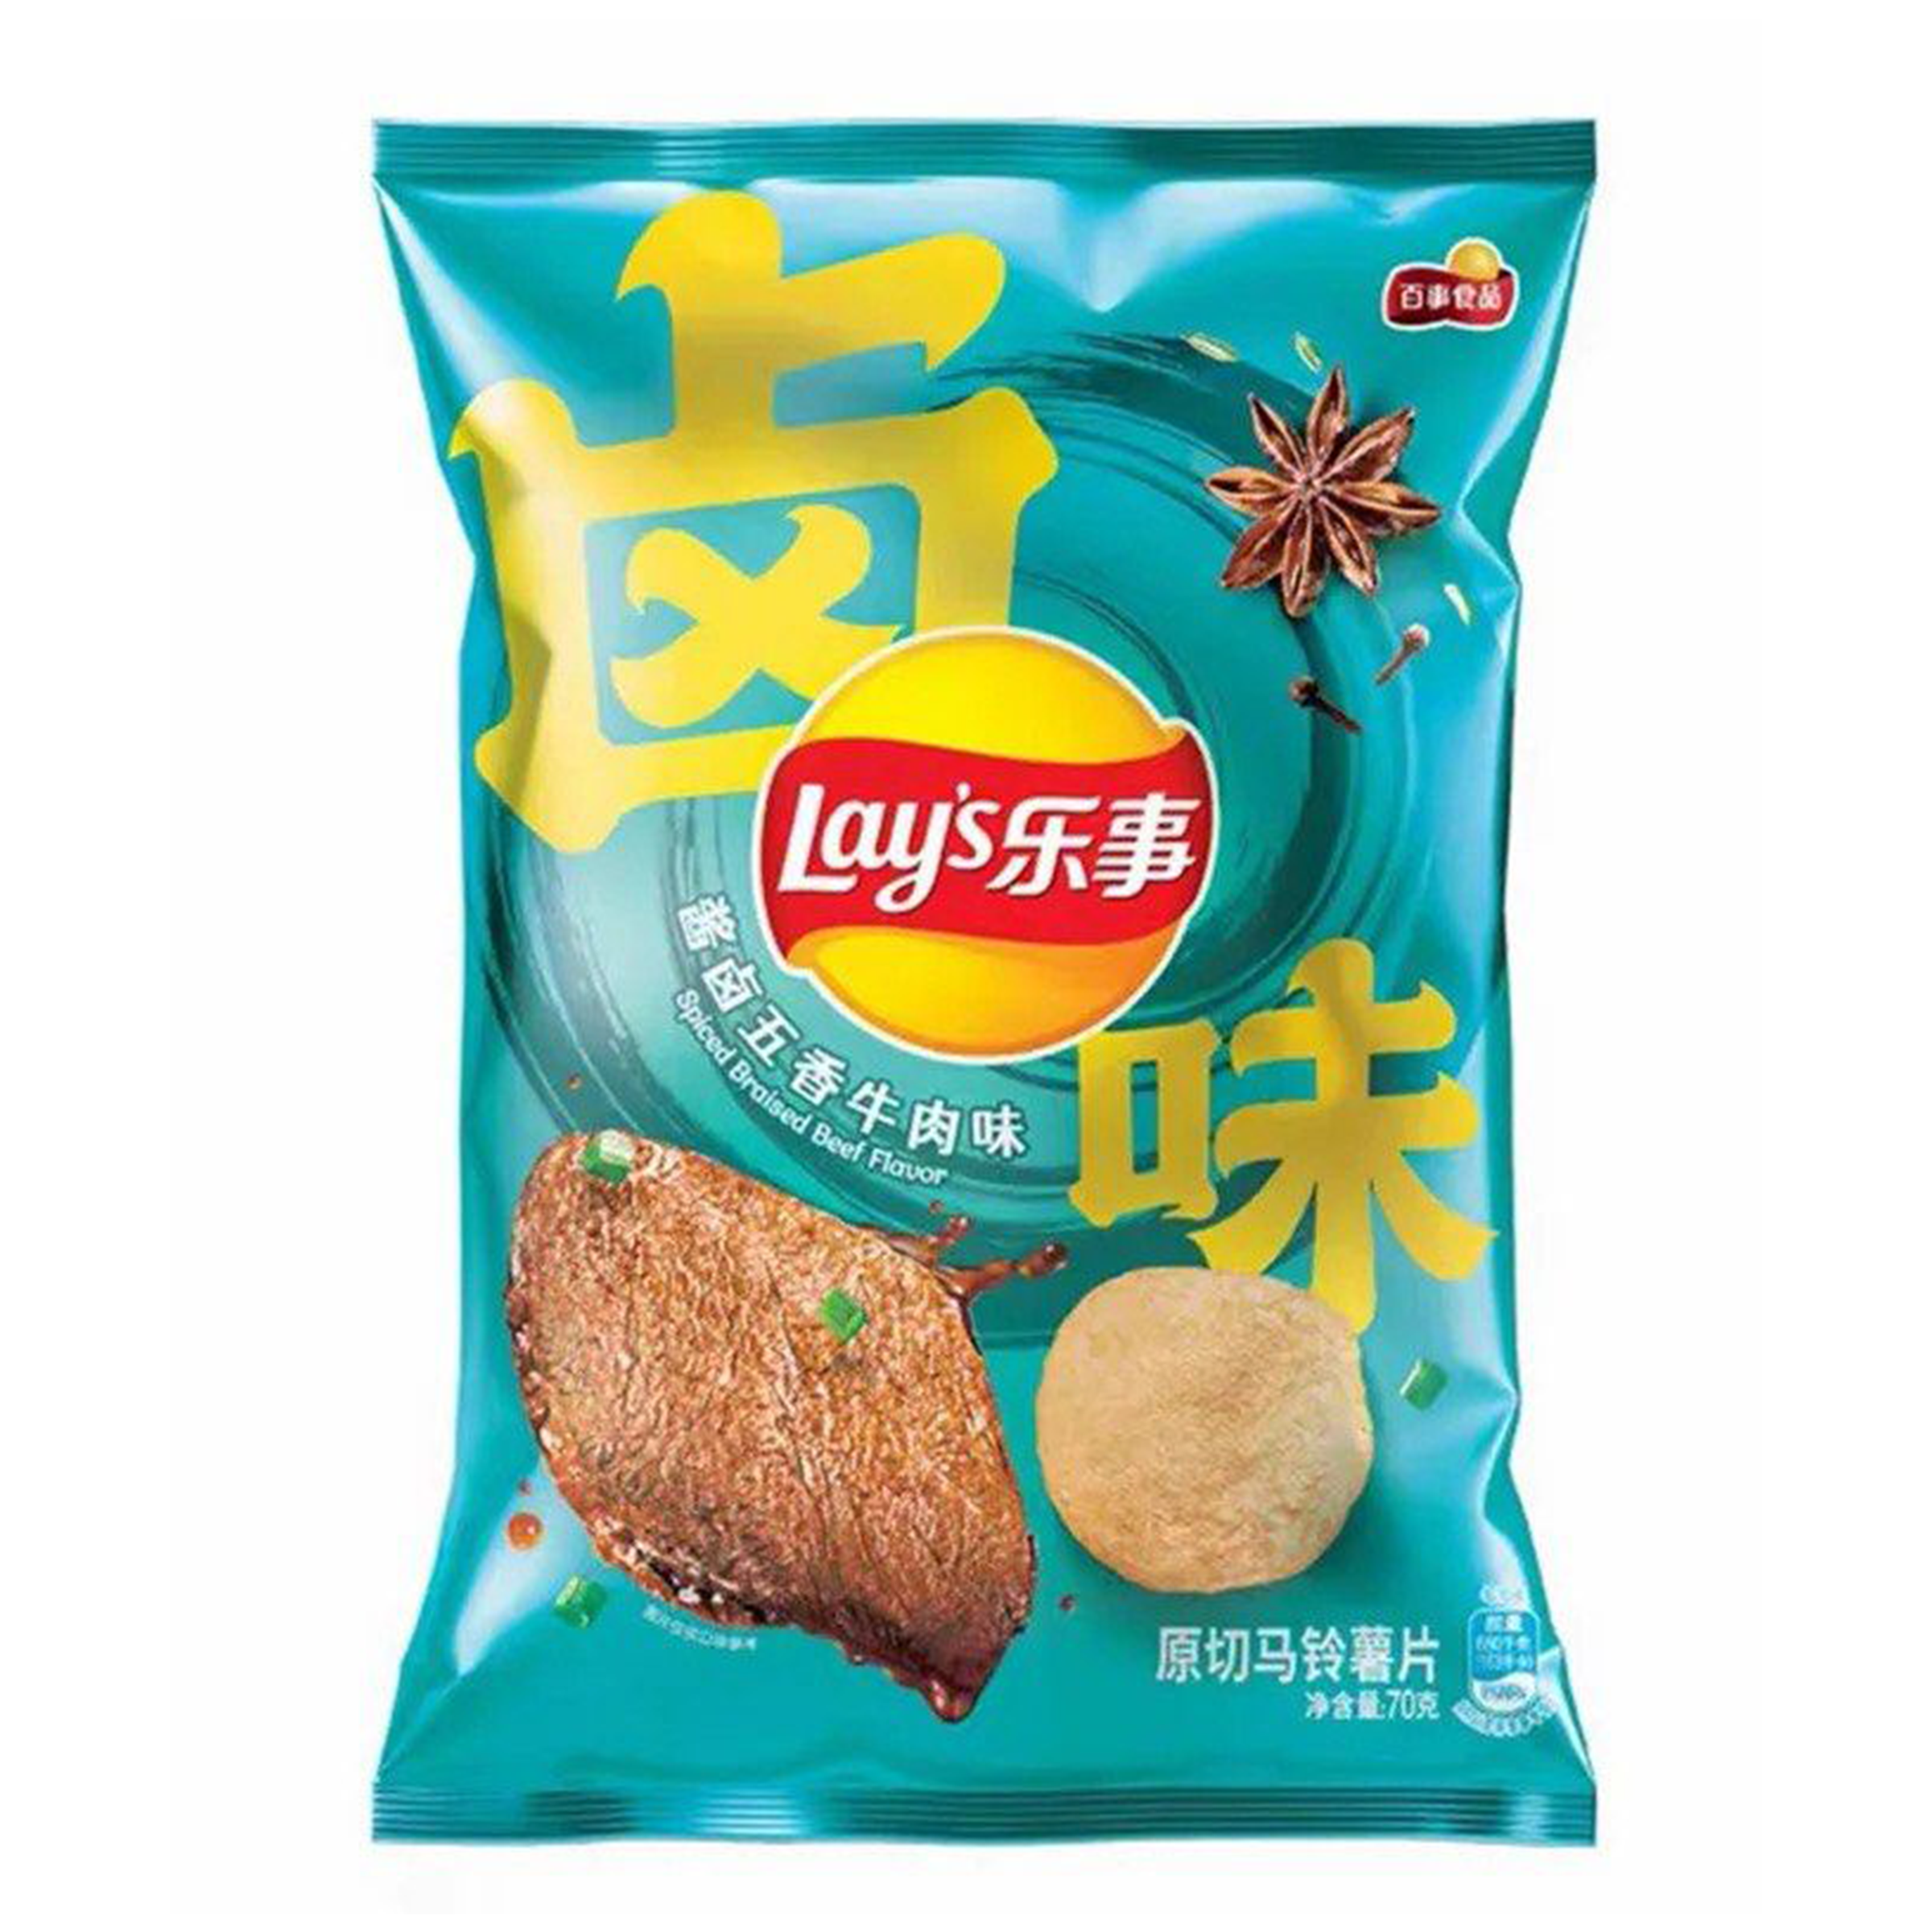 Lays - Spiced Brasied Beef Flavour (Asia)